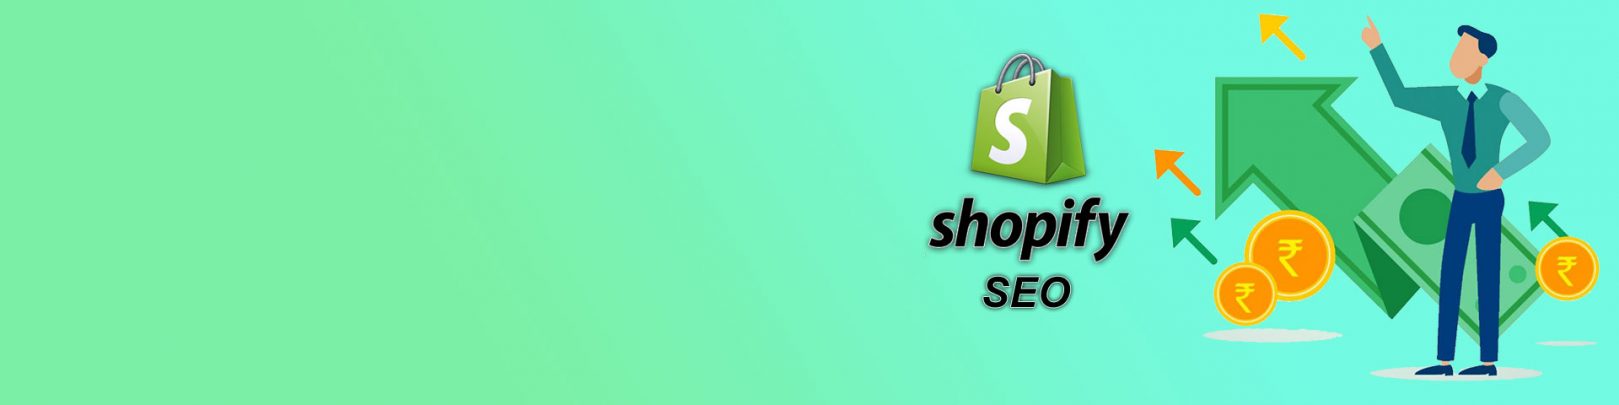 Shopify-SEO-The-Guide-to-Optimizing-Shopify-to-Rank-1